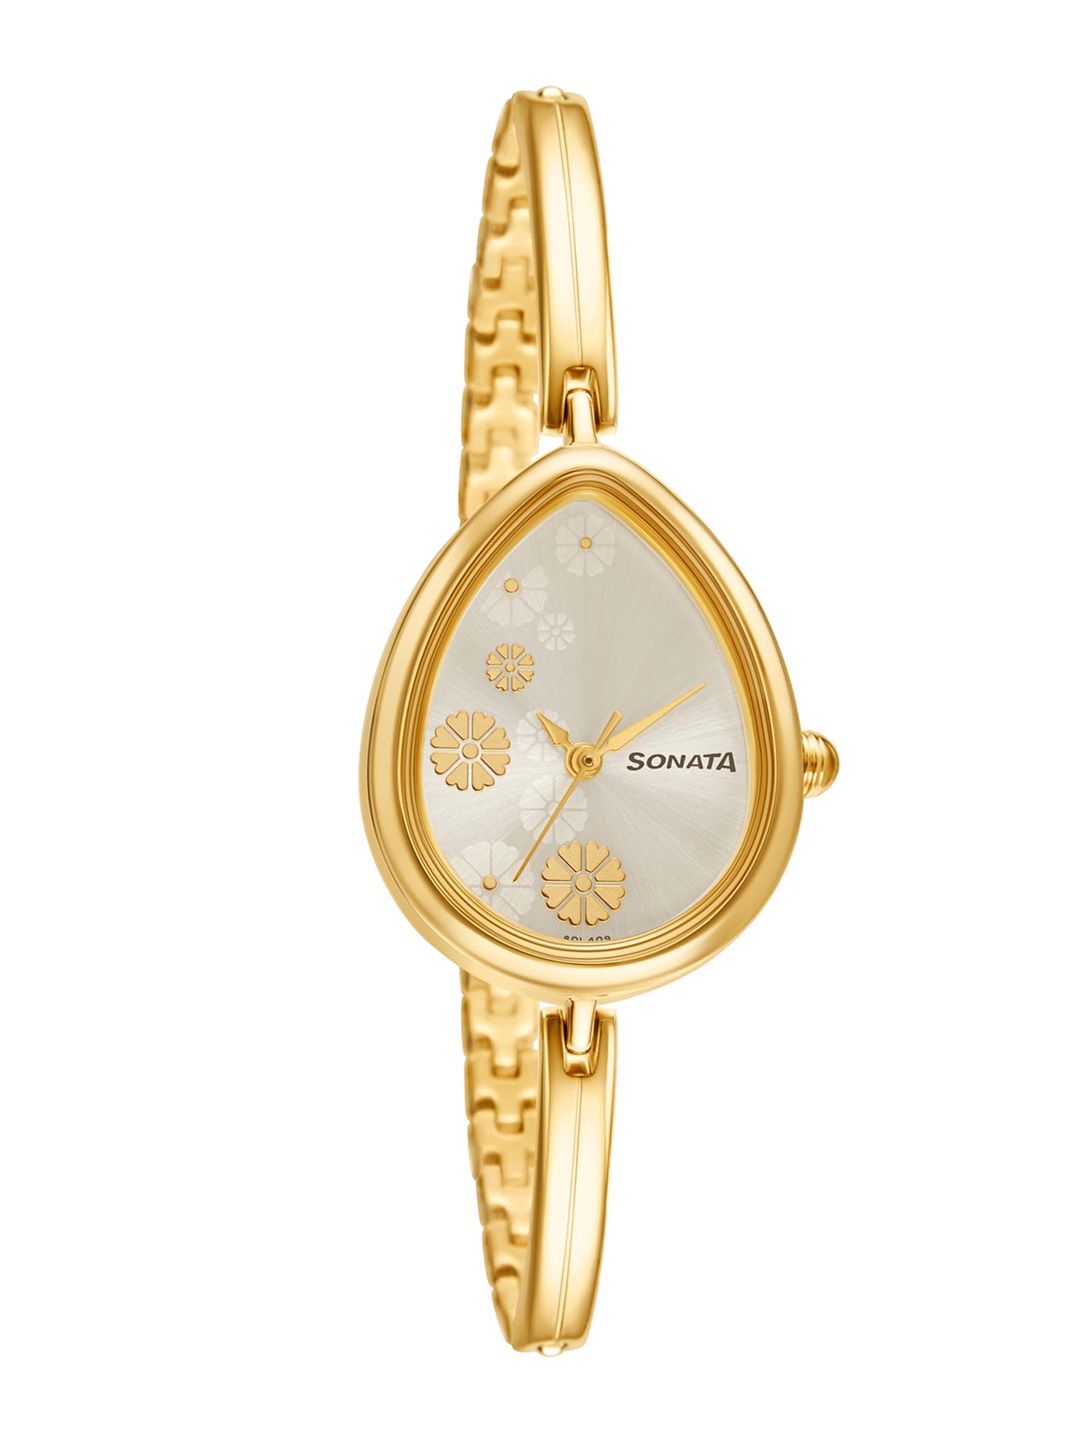 Sonata Women Gold-Toned Analogue Watch 8169YM01 Price in India